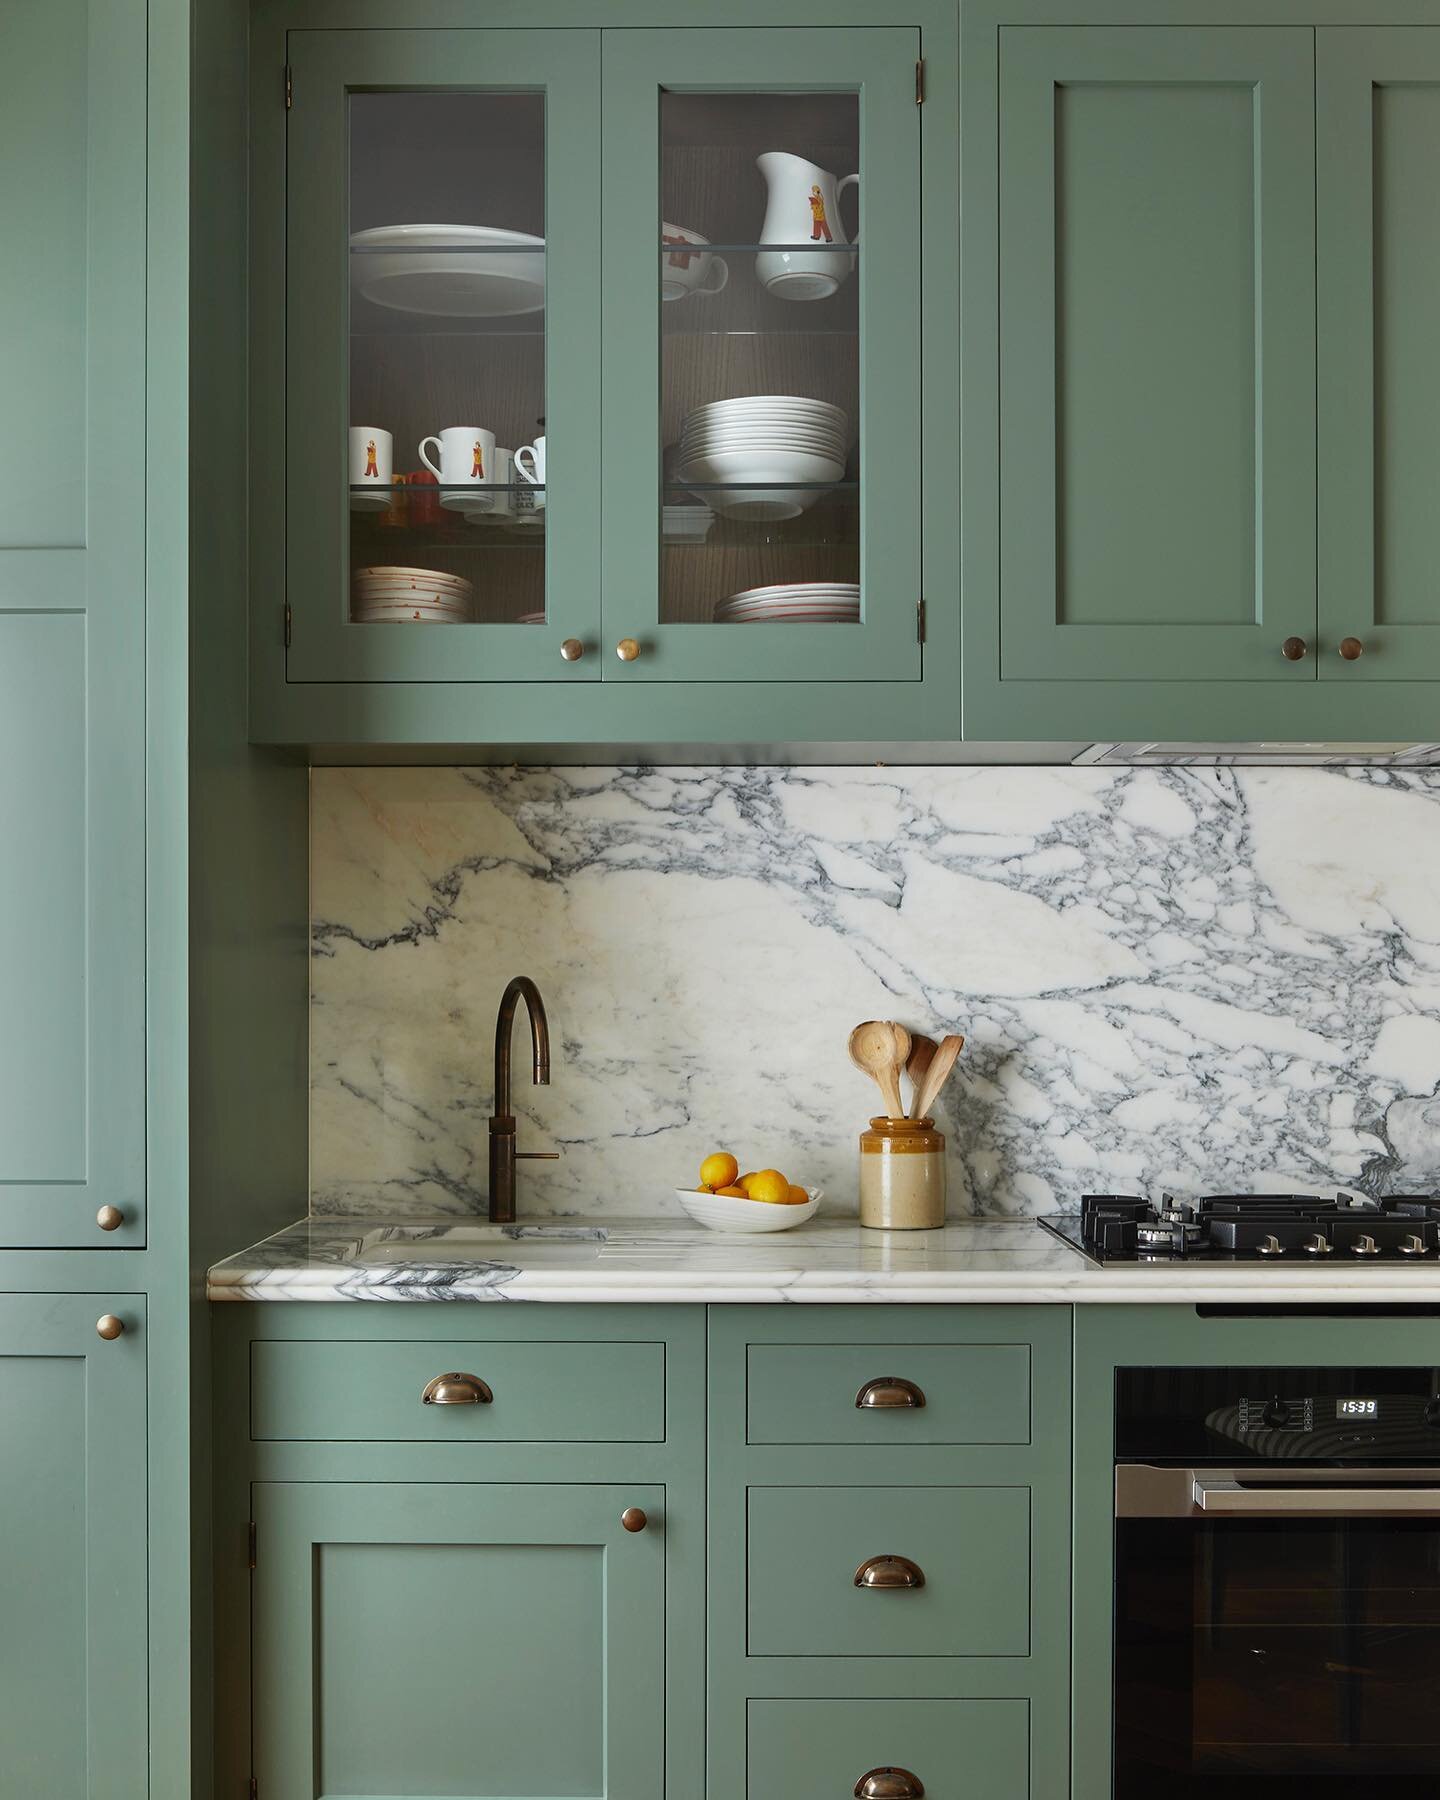 Kitchen snap from a recent project - we sourced this wonderful slab of arabescato marble and added a double bullnose profile to give depth 📸 @astridtemplier 
.
.
.
#kitchendesign #interiors #arabescato #marble #interiordesign #isabellaworsley